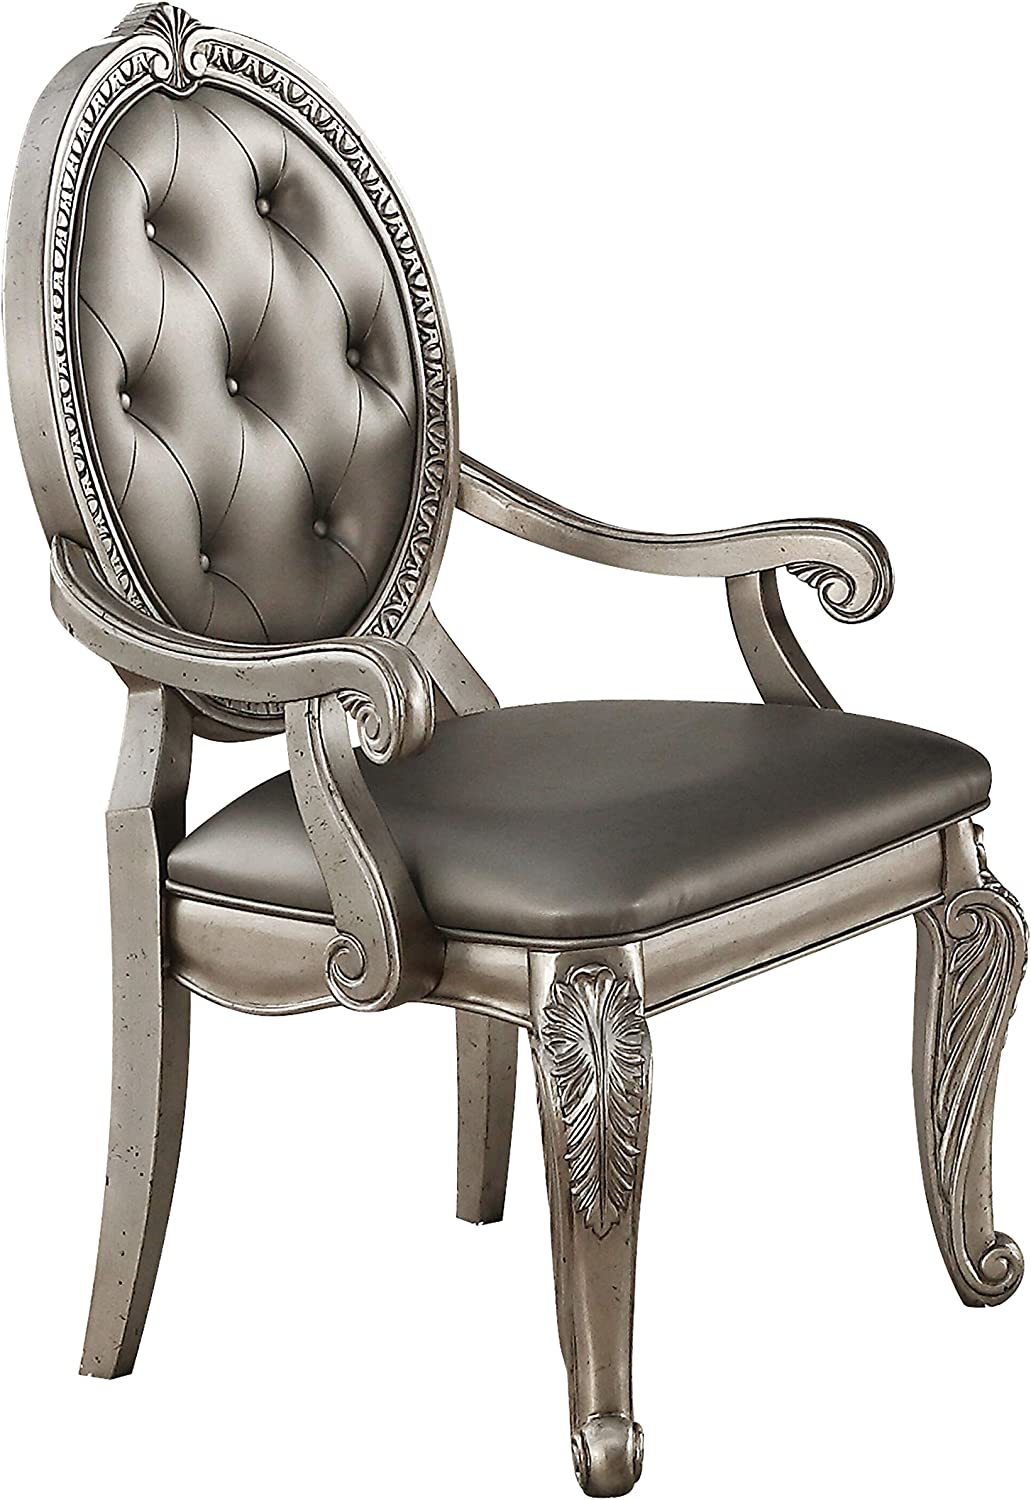 Antique Champagne Northville Armchair From Acme Furniture. - $537.98